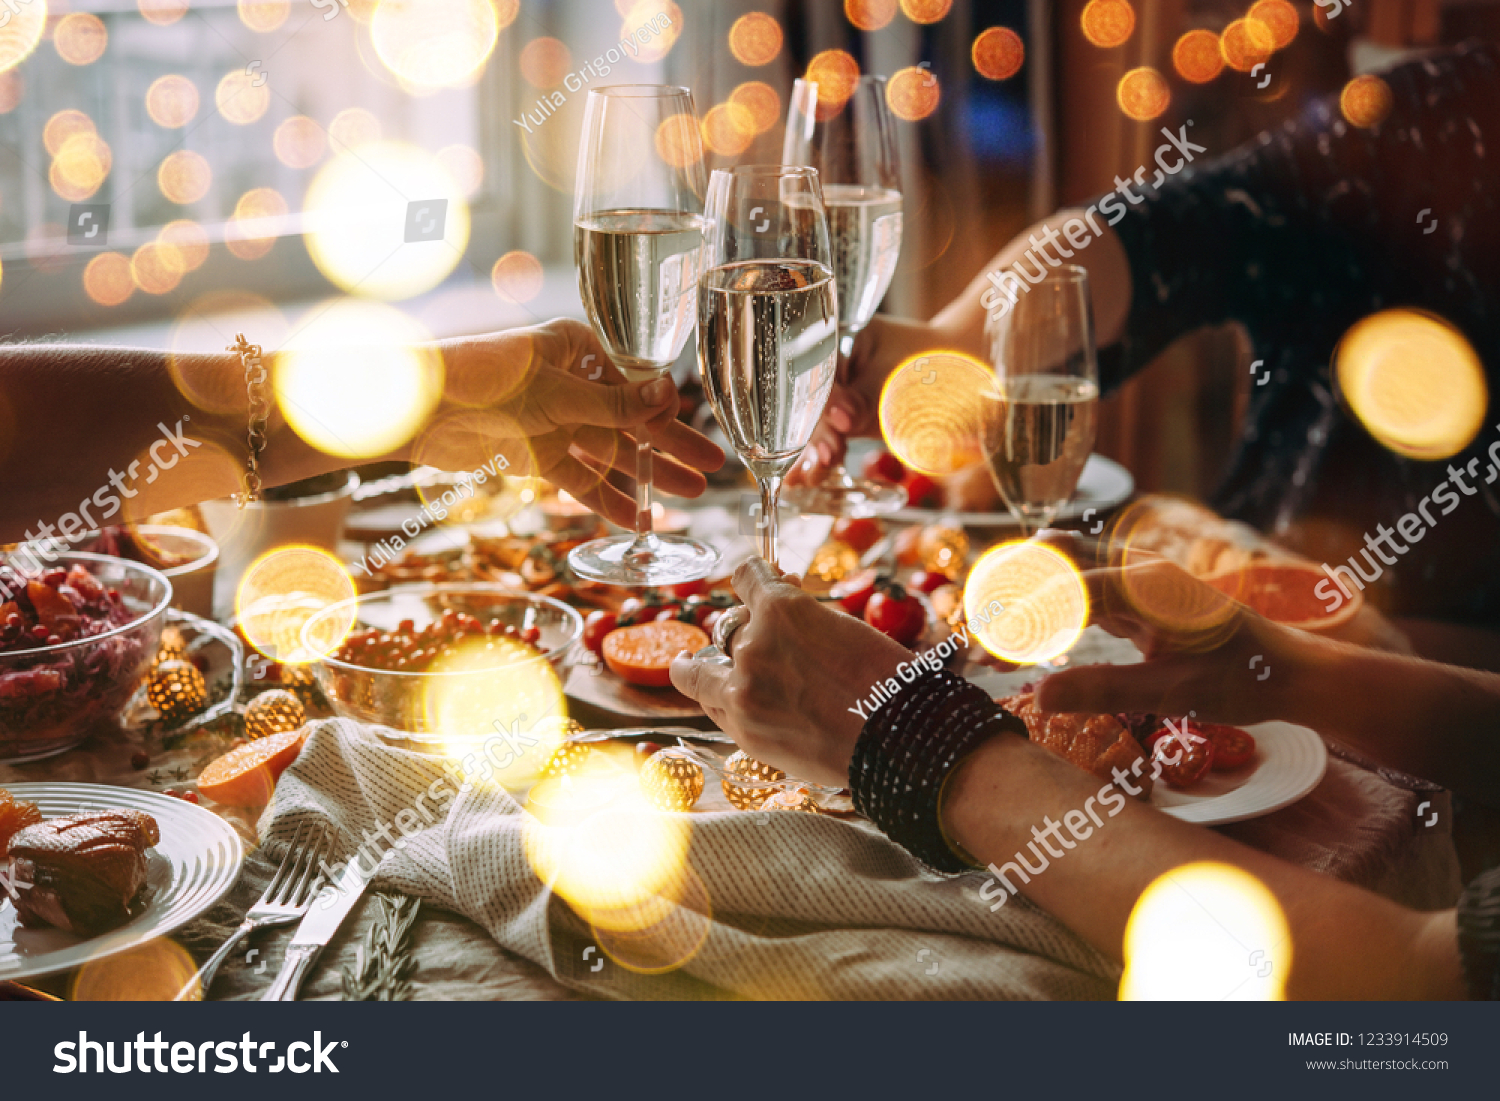 Party table with glasses of champagne. Friends celebrating Christmas or New Year eve. #1233914509